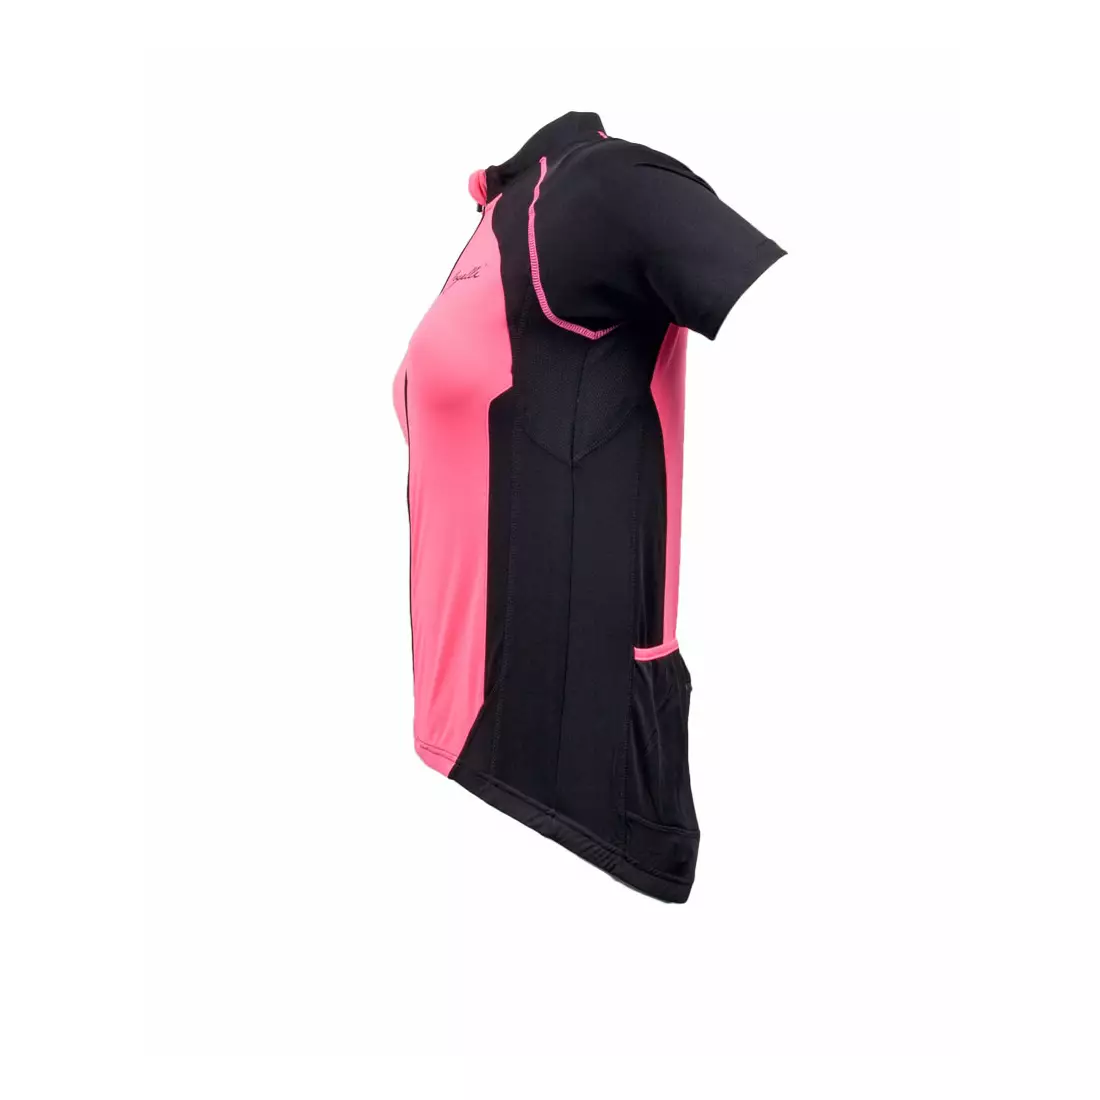 ROGELLI BICE - women's cycling jersey, black and pink